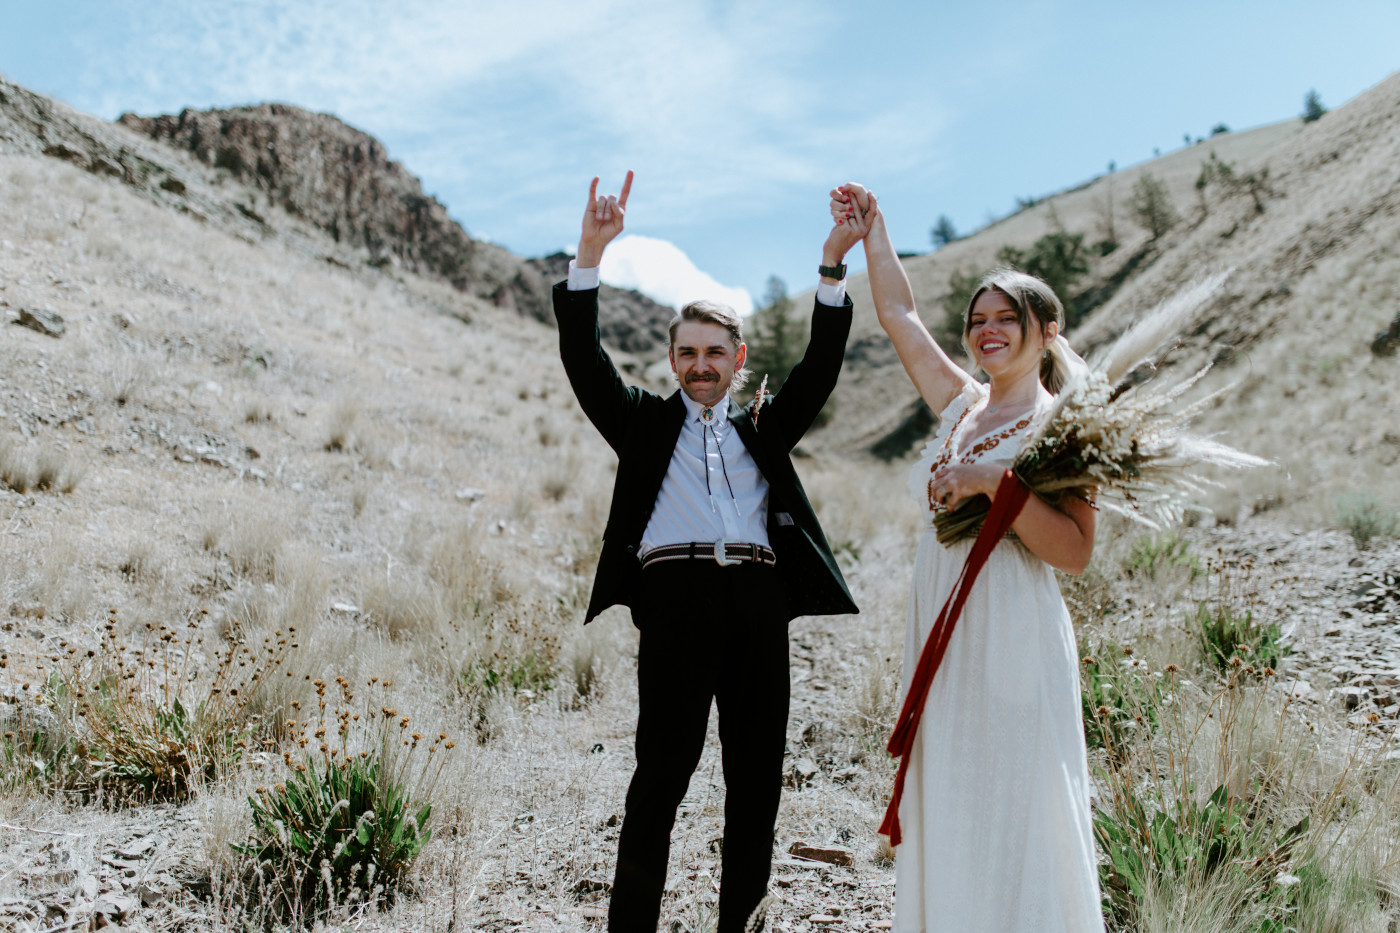 Greyson and Emily celebrate after their ceremony. Elopement photography in the Central Oregon desert by Sienna Plus Josh.